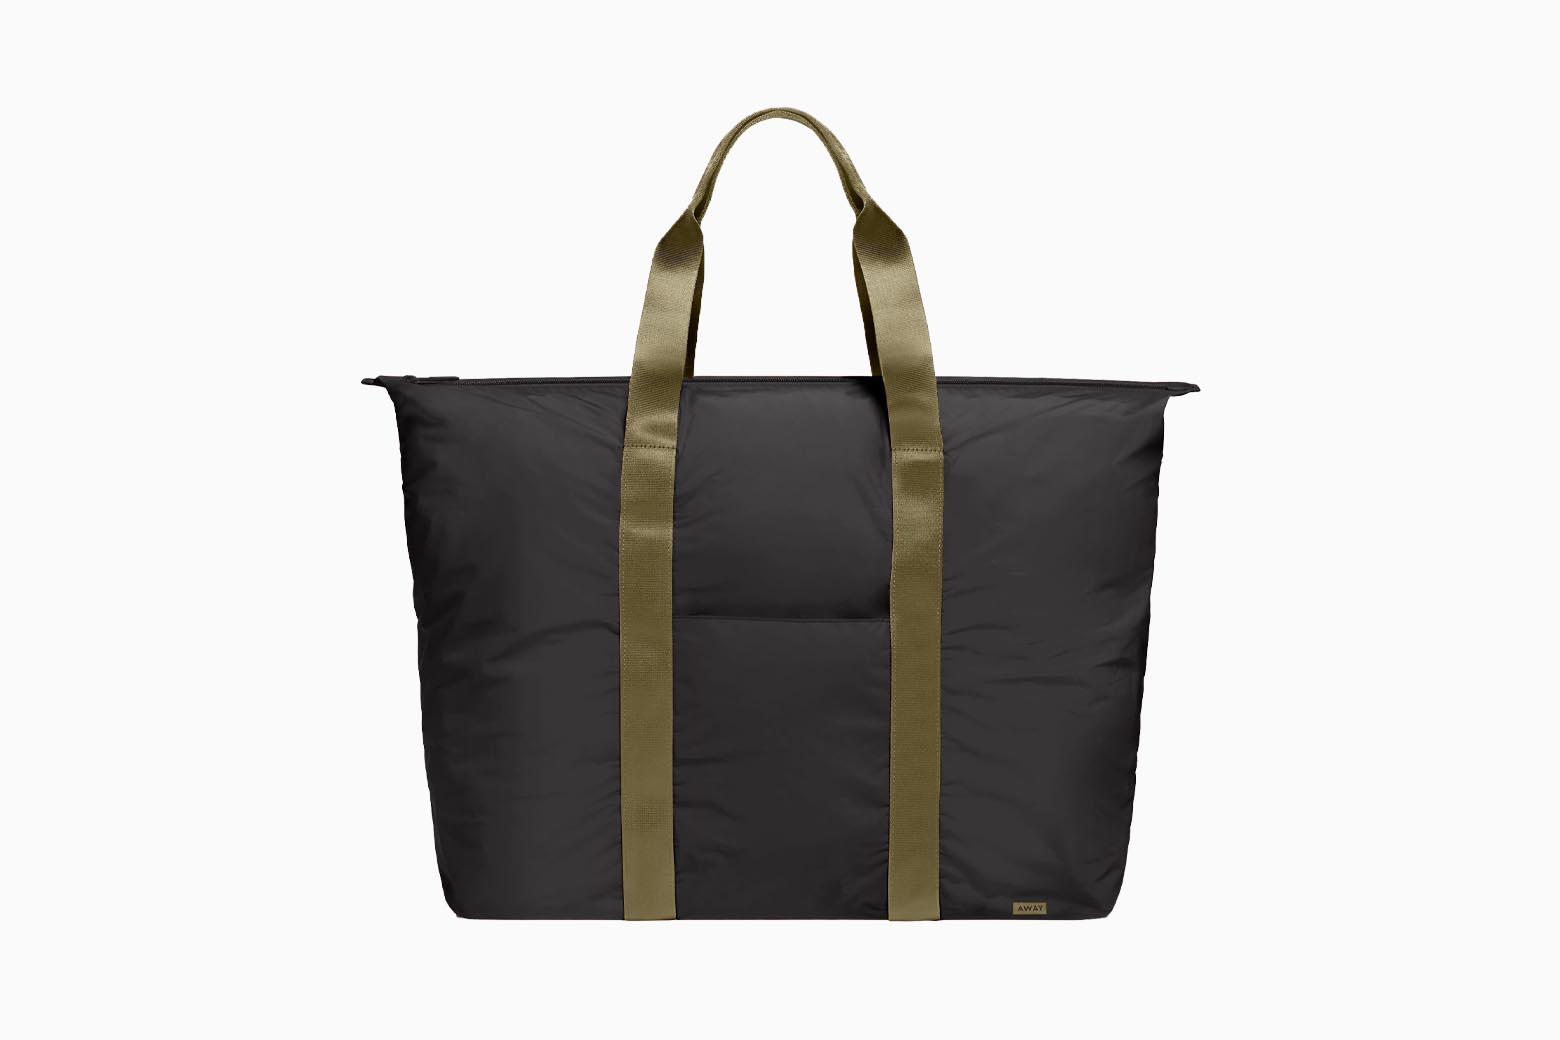 11 Best Travel Tote Bags: Smart & Stylish Carry-On Bags (Ranking)